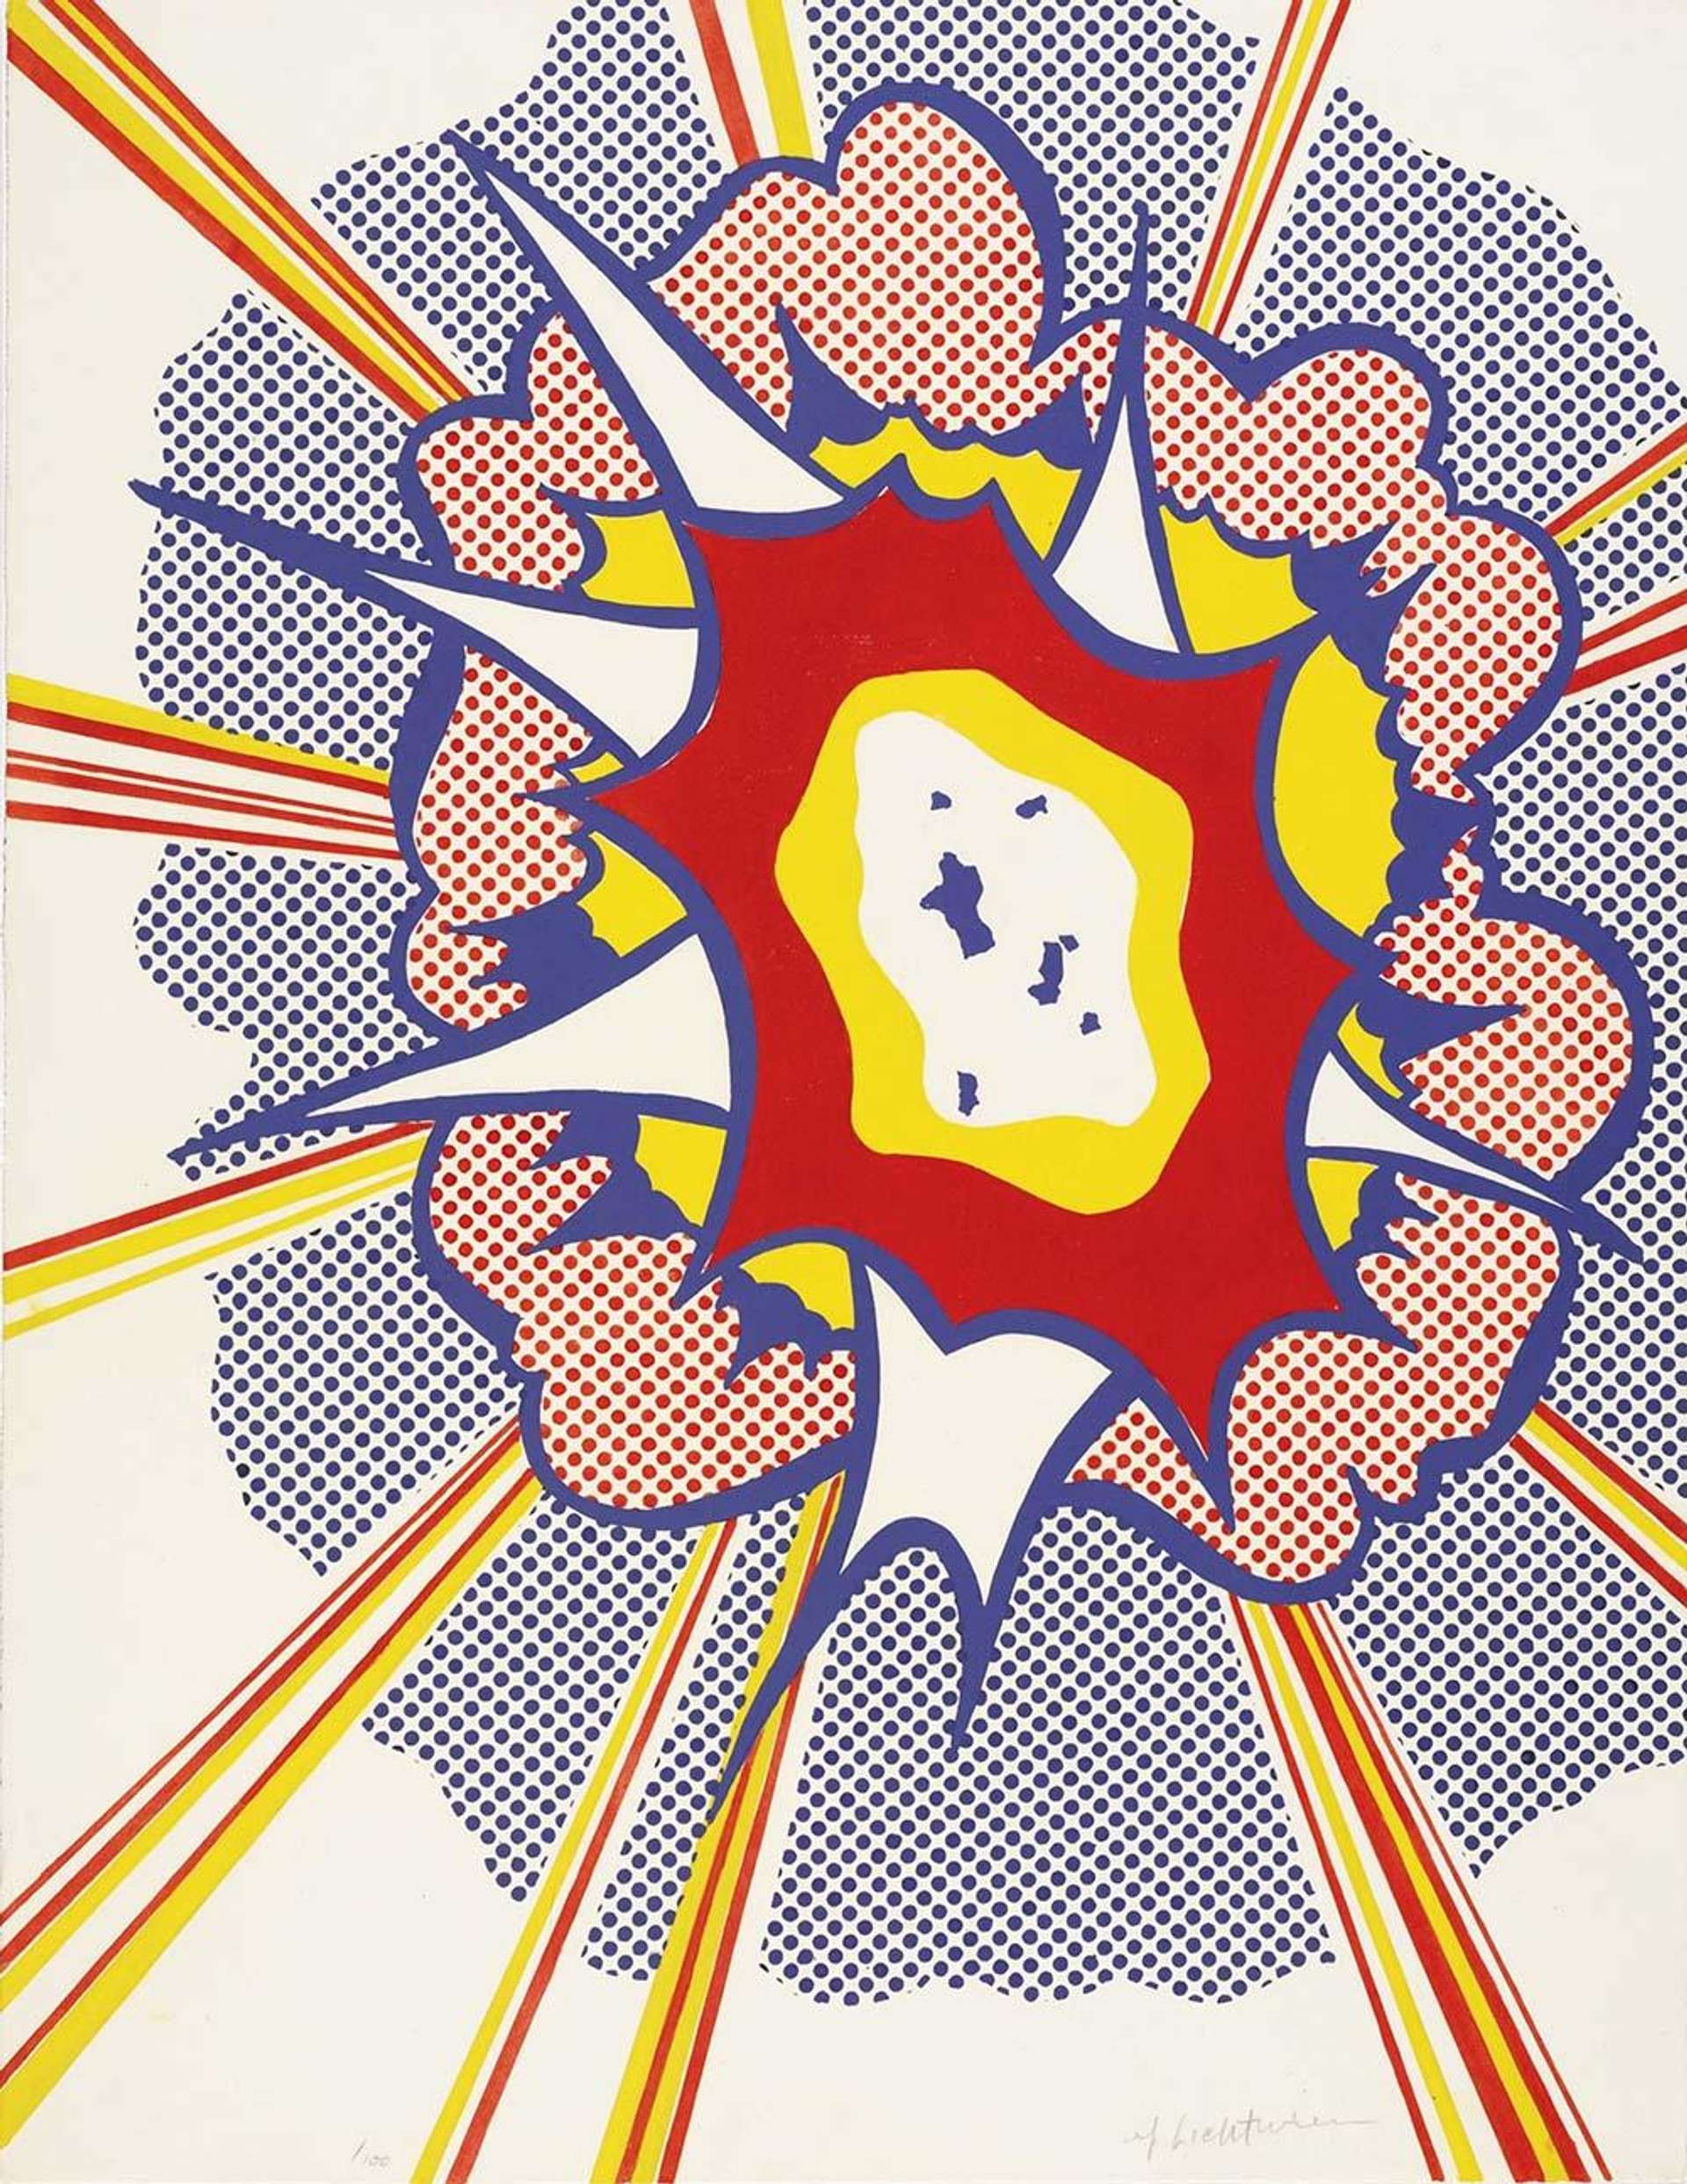 An image of the print Explosion by the artist Roy Lichtenstein. The artwork depicts an explosion, using his signature graphic comic book style.